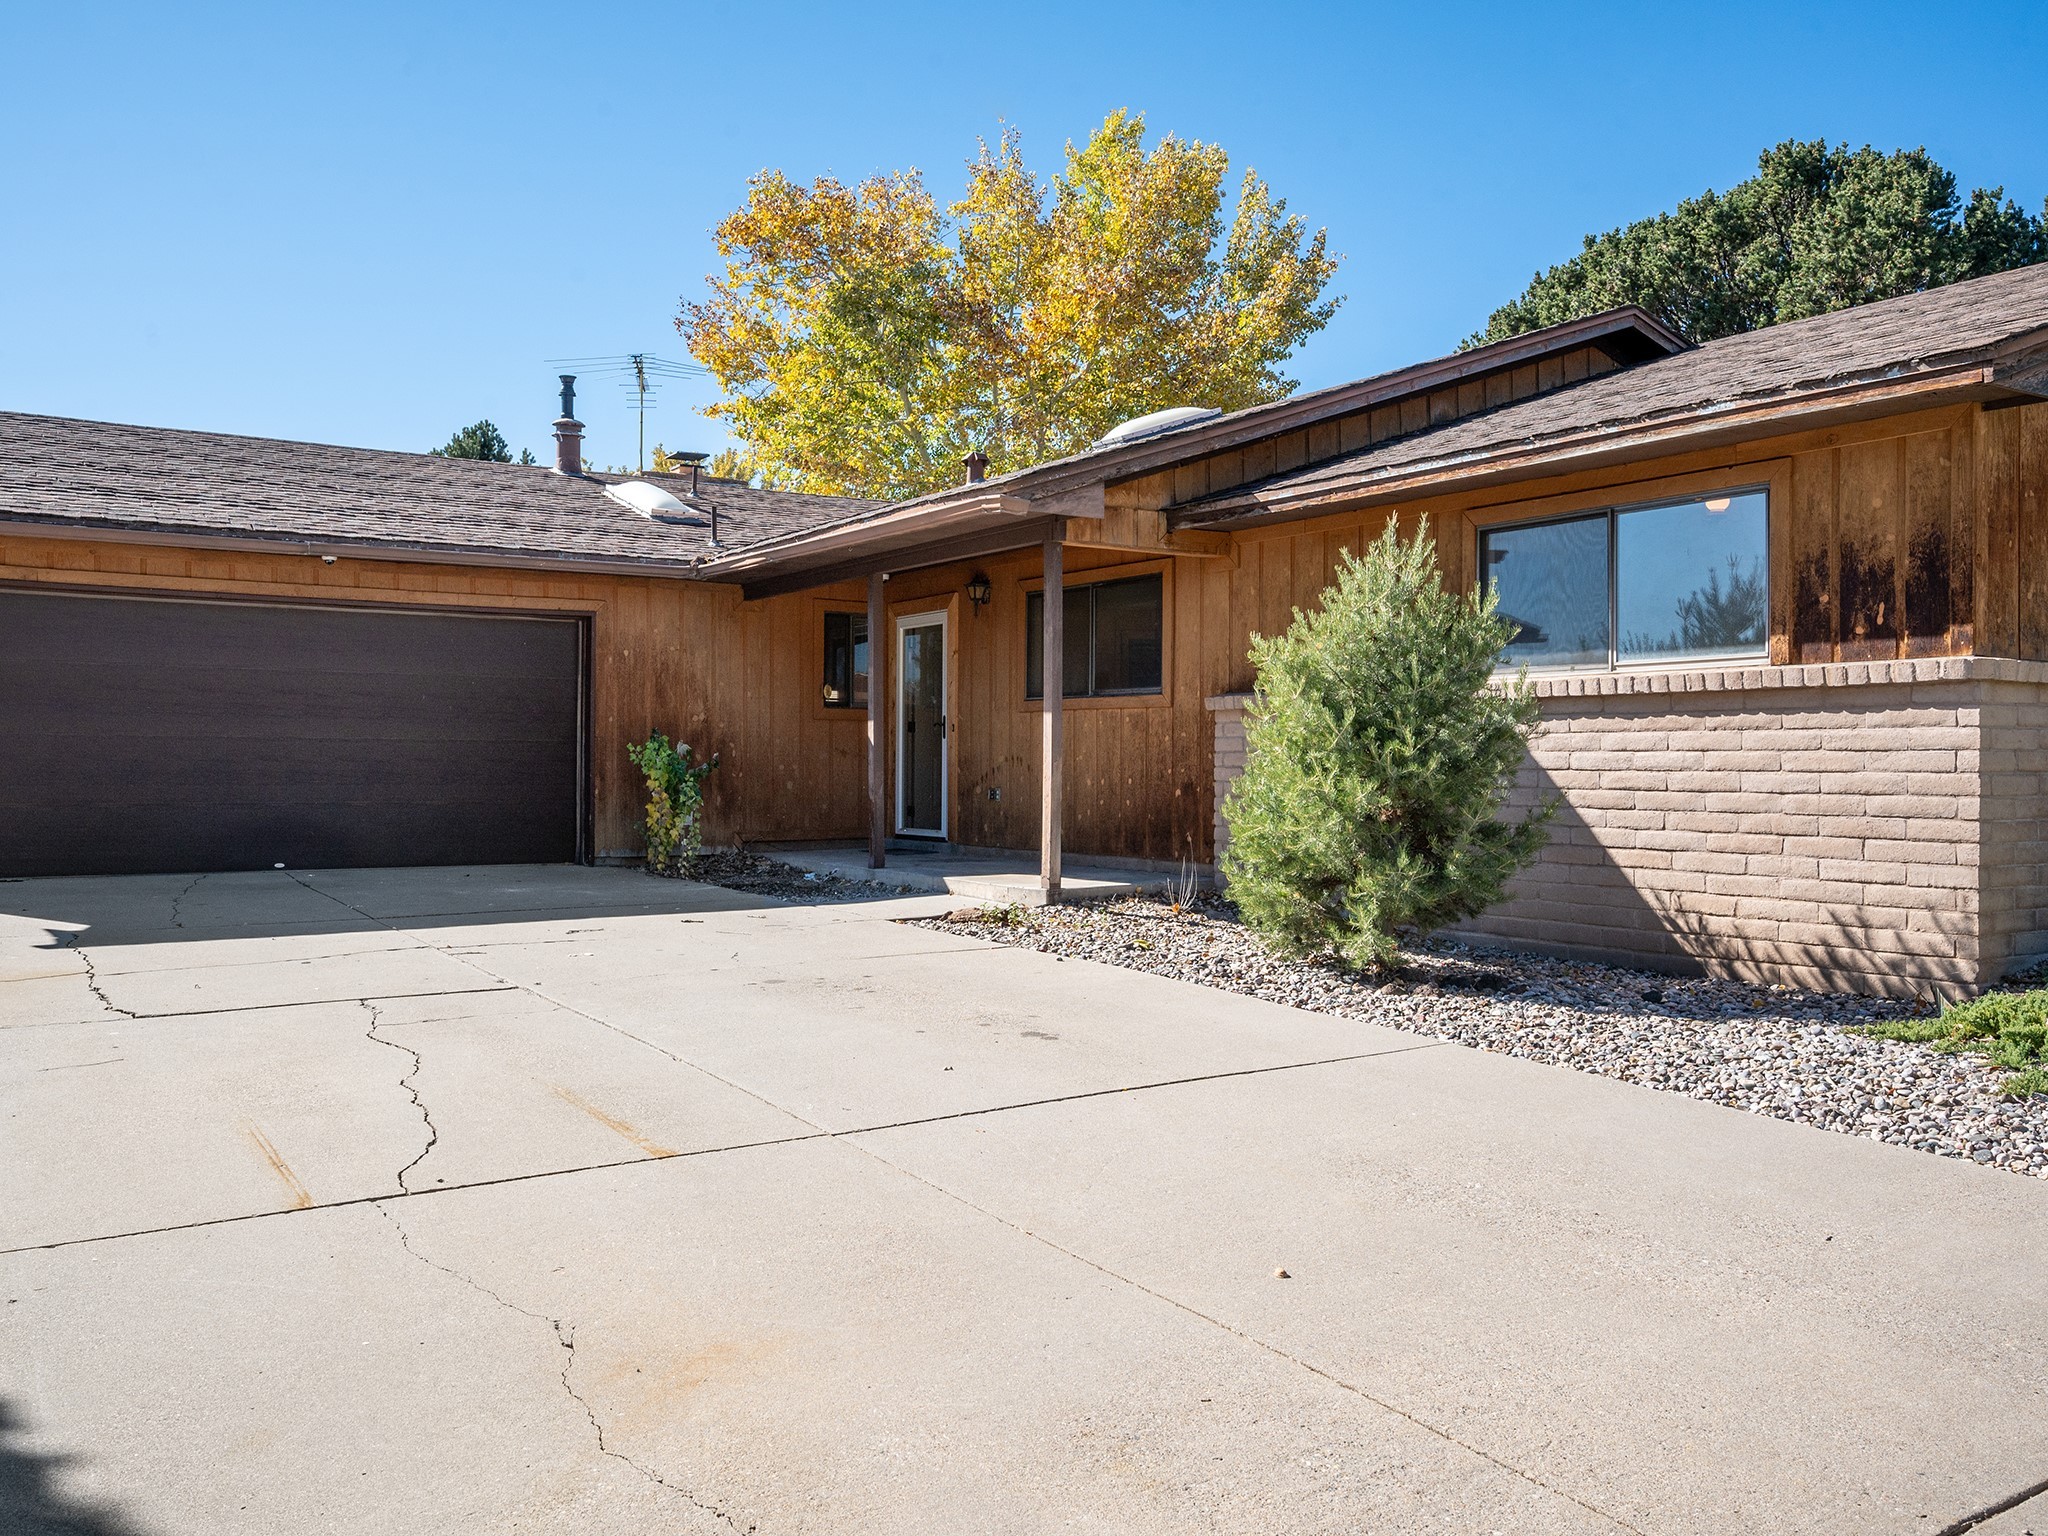 447 Grand Canyon Drive, White Rock, New Mexico 87547, 3 Bedrooms Bedrooms, ,2 BathroomsBathrooms,Residential,For Sale,447 Grand Canyon Drive,202233591